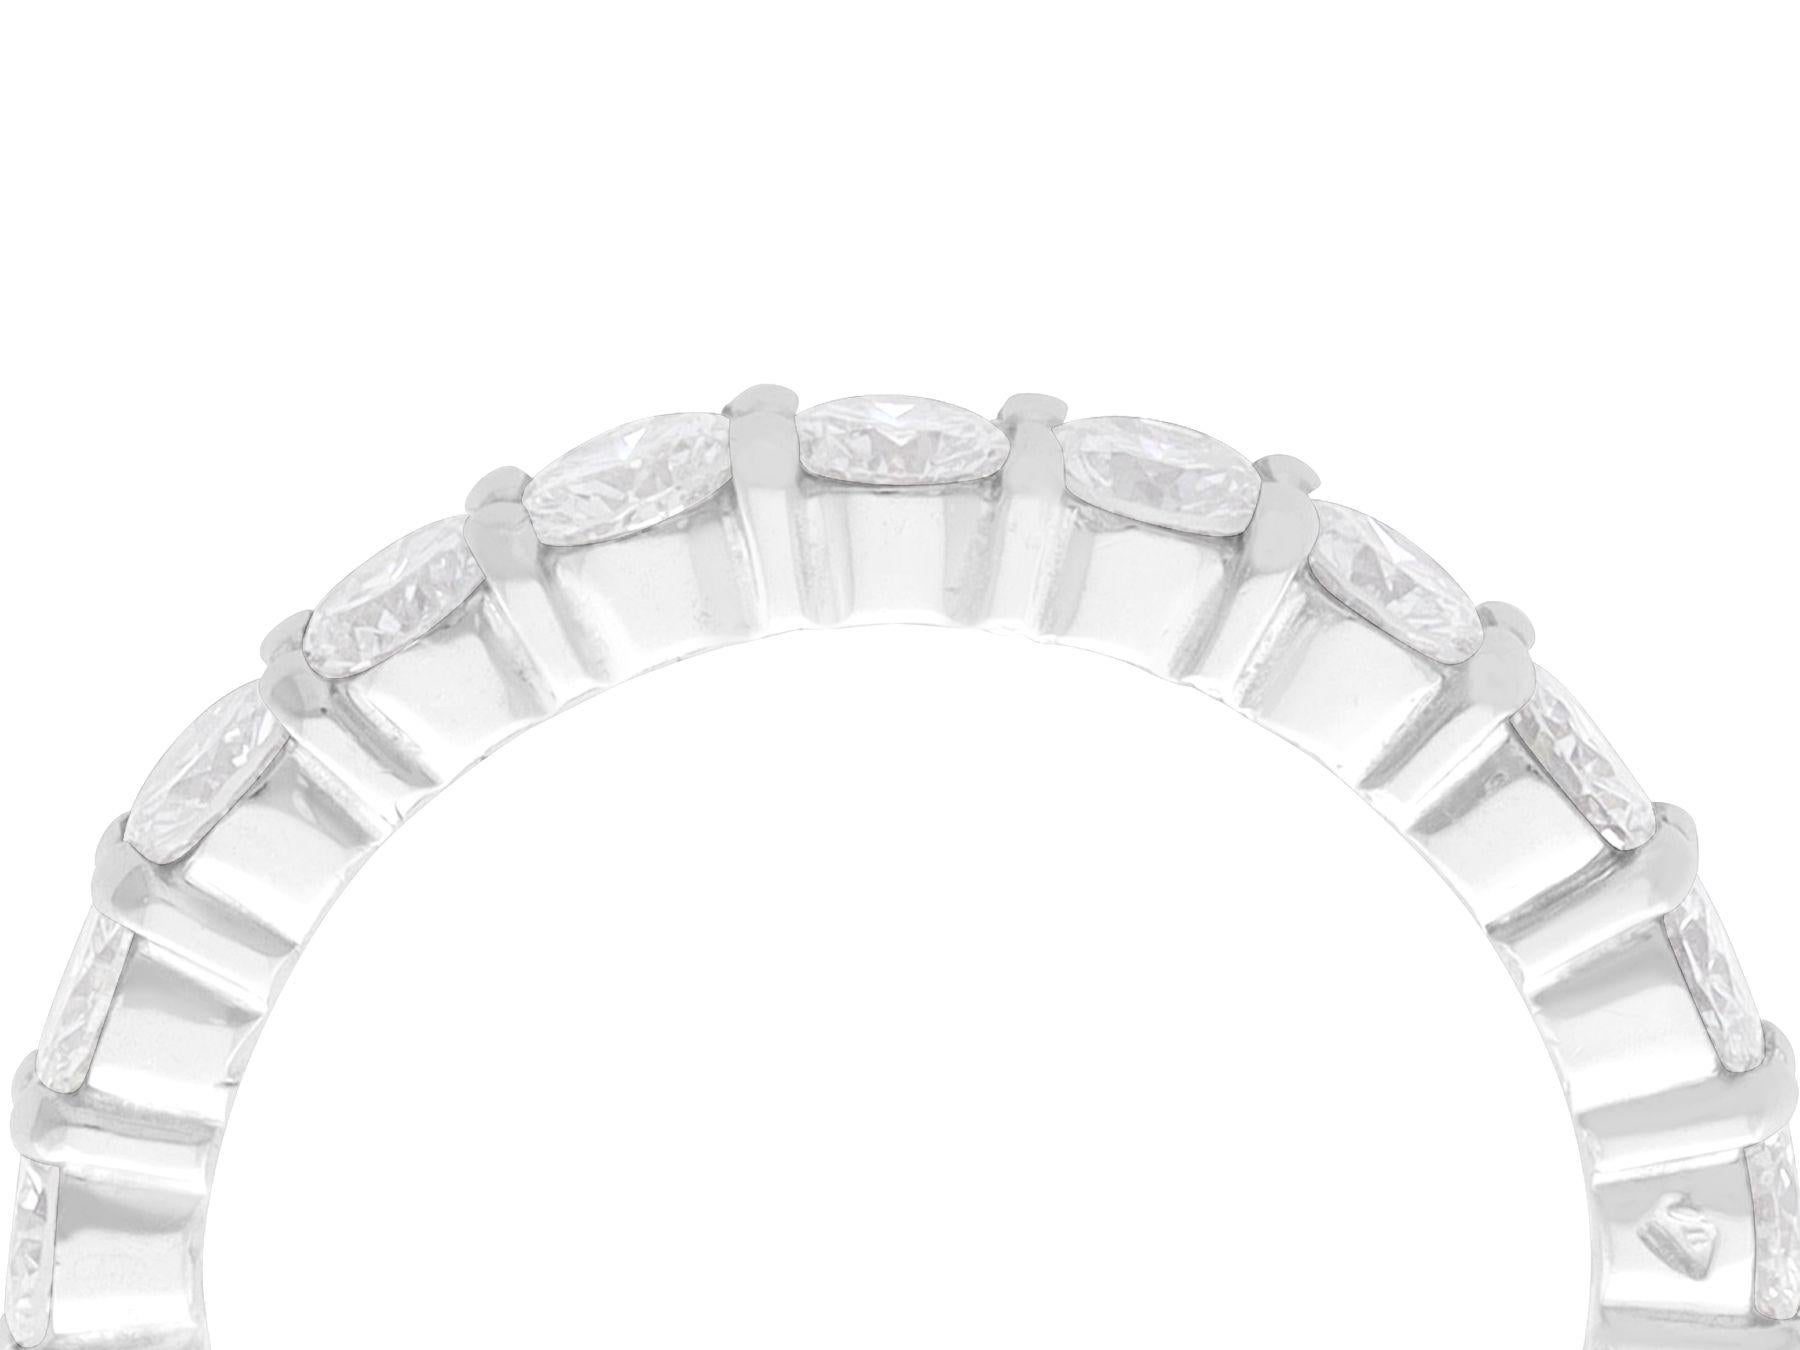 A fine and impressive vintage 1950s 1.89 carat diamond and 18 karat white gold full eternity ring; part of our diverse diamond jewelry and estate jewelry collections

This fine and impressive diamond eternity ring has been crafted in 18k white